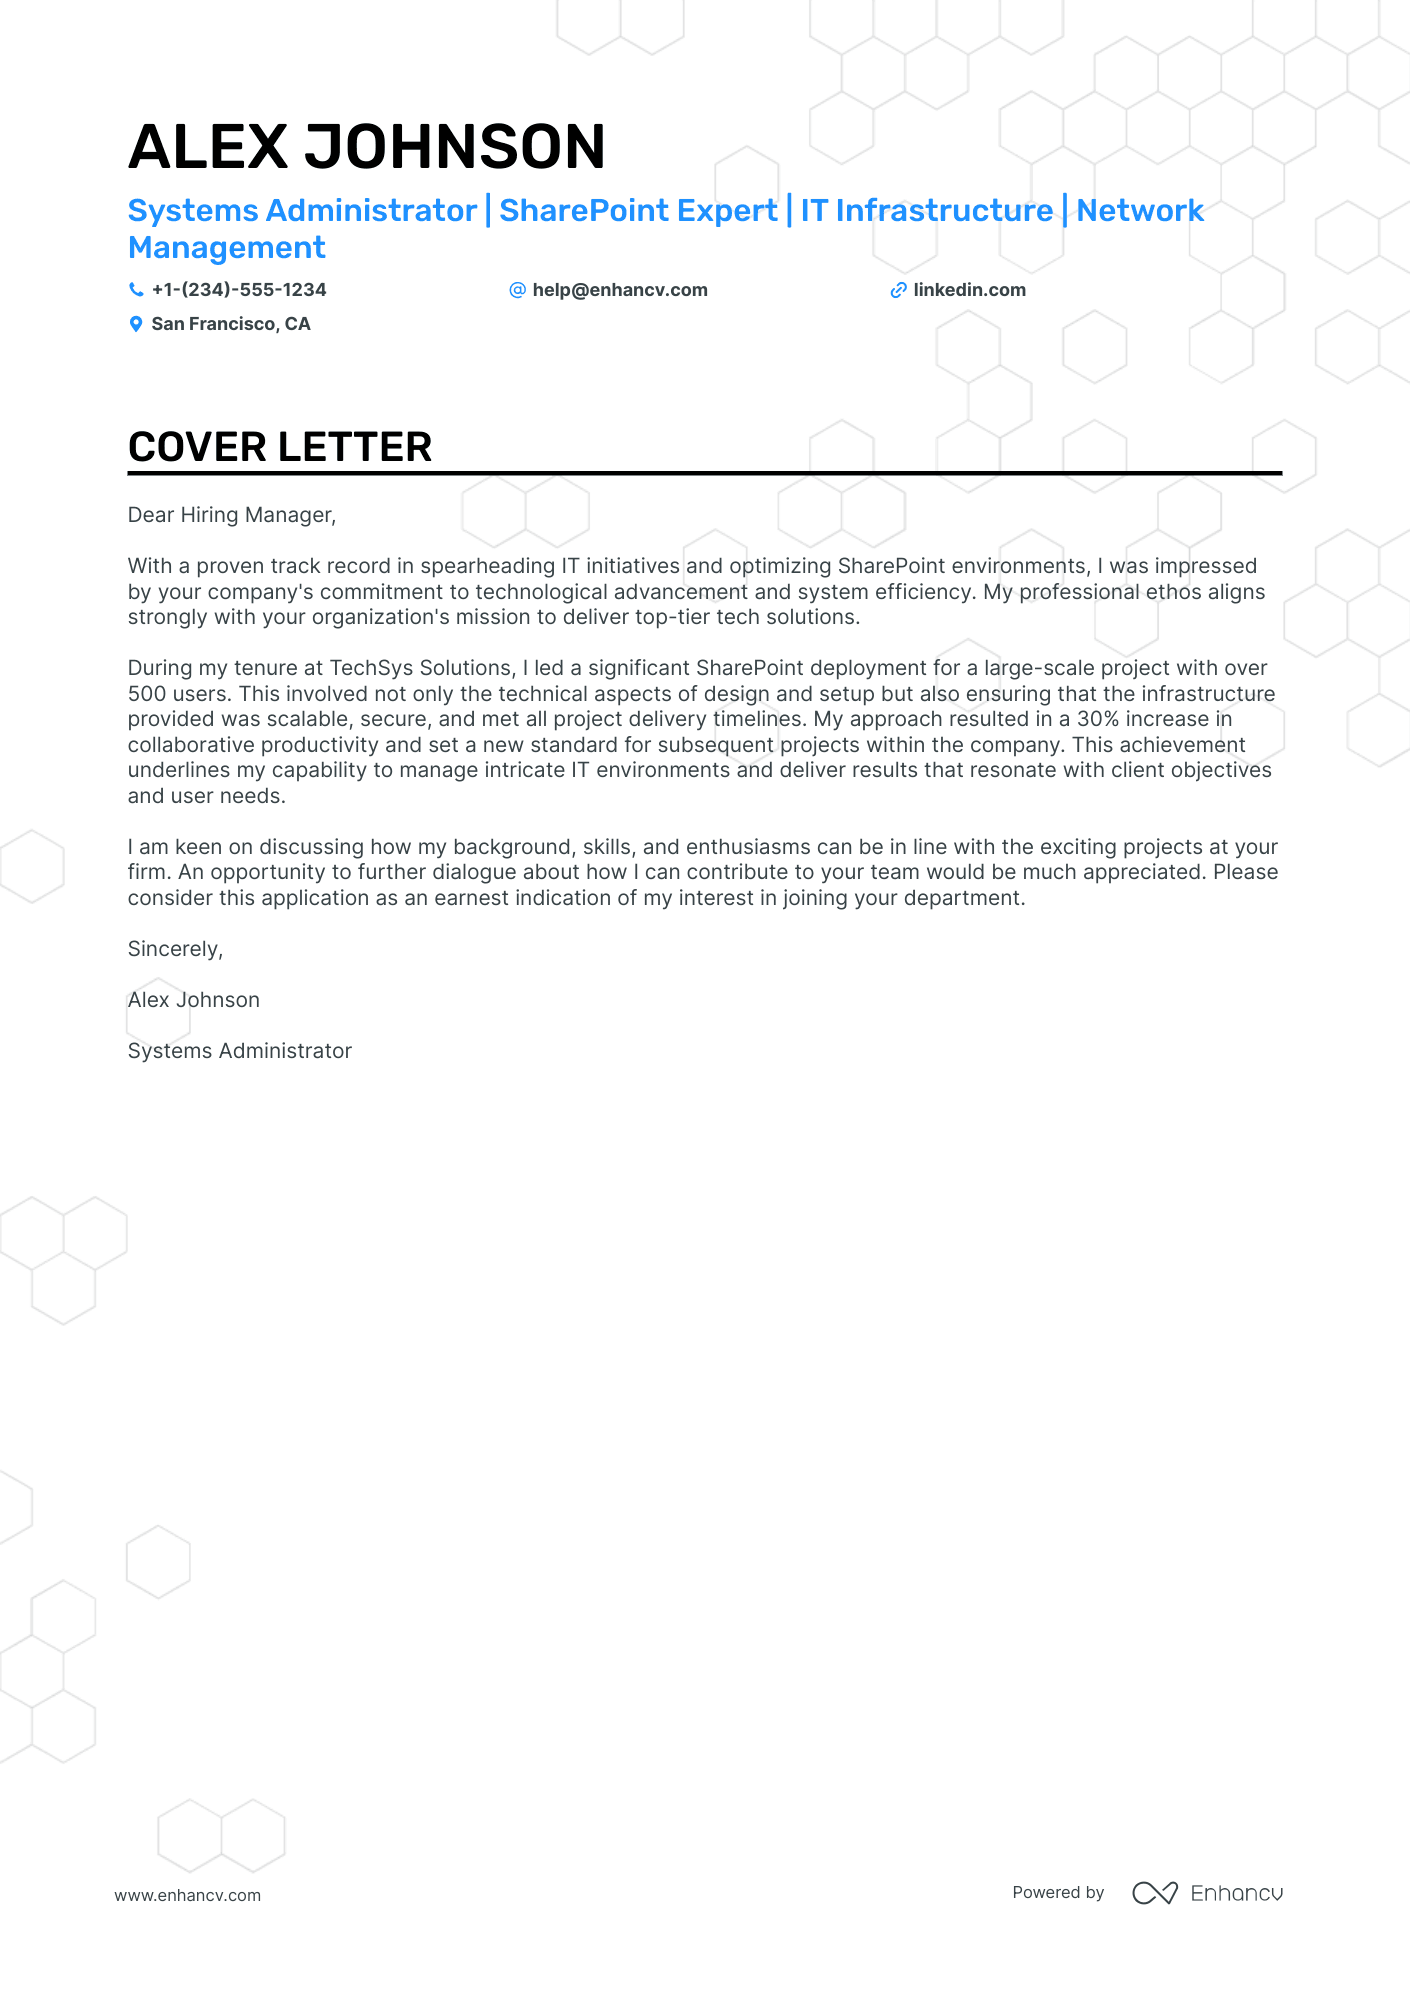 Sharepoint cover letter